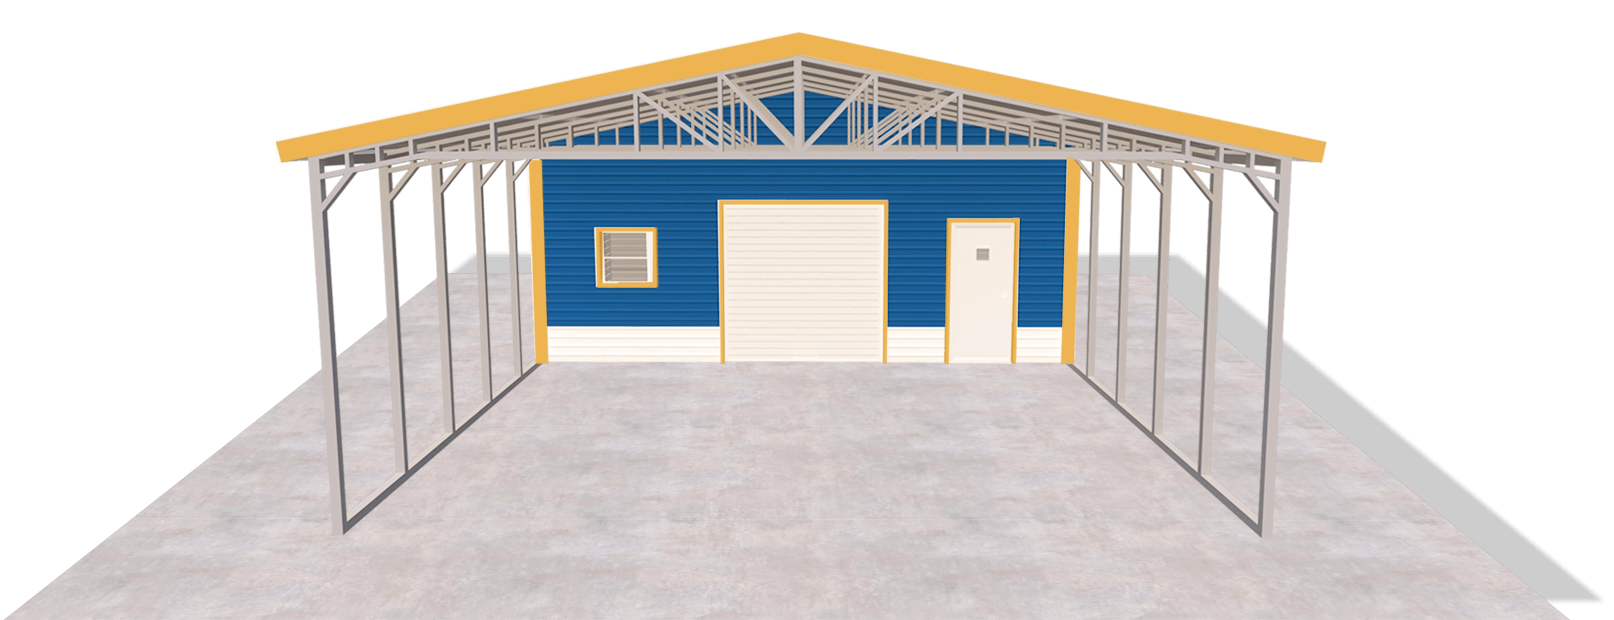 Know More About Metal Building Components By Central Steel Carports